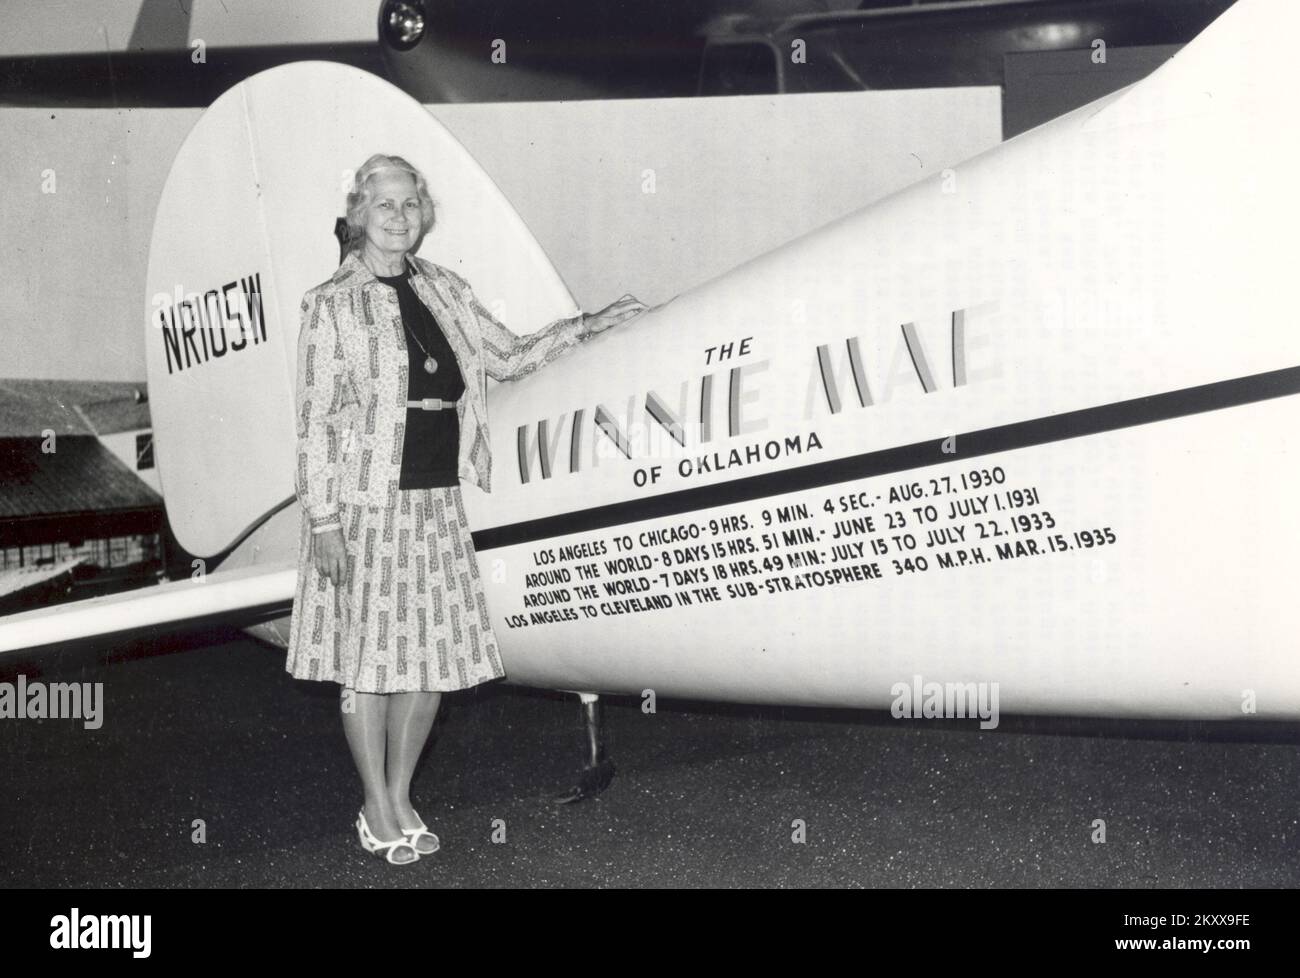 Fay Gillis Wells, writer, broadcaster, foreign correspondent, sailor, designer of boat interiors and noted aviatrix, stands in the National Air and Space Museum beside the Winnie Mae. This is the plane in which Wiley Post made his record-breaking global flight in 1933. Fay Wells participated in Posts achievement by managing the fuel dumps for the Winnie Mae in Siberia and by providing Wiley Post with the maps and navigation data. These services contributed to the success of the flight by which Post broke his own global record of 1931. Date 1976 Stock Photo